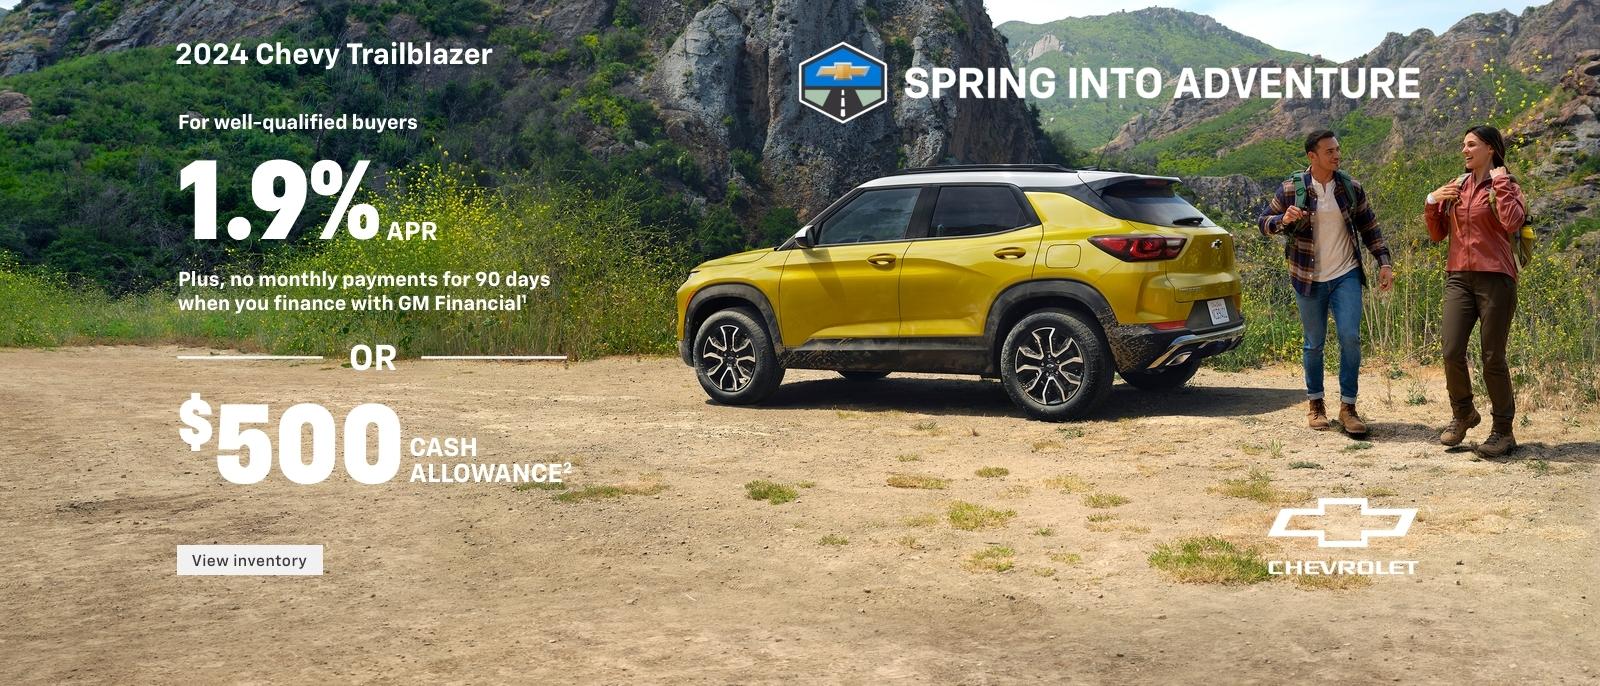 2024 Chevy Trailblazer. Spring into Adventure. For well-qualified buyers 1.9% APR + no monthly payments for 90 DAYS when you finance with GM Financial. Or, $500 cash allowance.